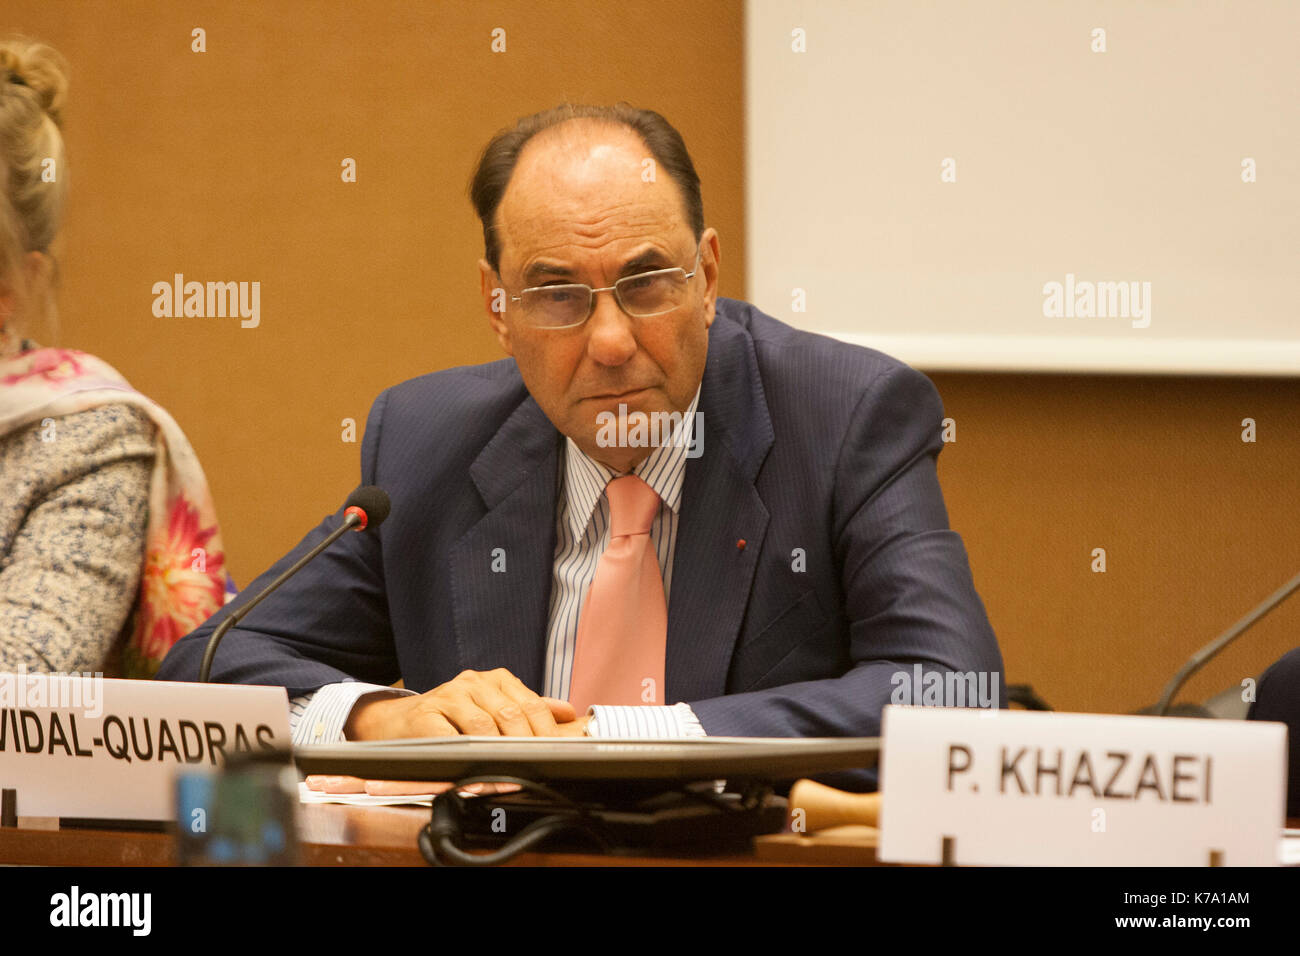 Geneva, United States. 14th Sep, 2017. Alejo Vidal-Quadras, President of the International Committee in Search of Justice(ISJ), United Nations, Geneva, Switzerland 14/09/2017 - Human Rights experts and personalities in a conference on September 13, 2017, at the 36th session of the Human Rights Council in Geneva, supported the request of Asma Jahangir, the UN Special Rapporteur on the situation of human rights in Iran, for investigation of the 1988 Massacre in Iran. Credit: Siavosh Hosseini/Pacific Press/Alamy Live News Stock Photo